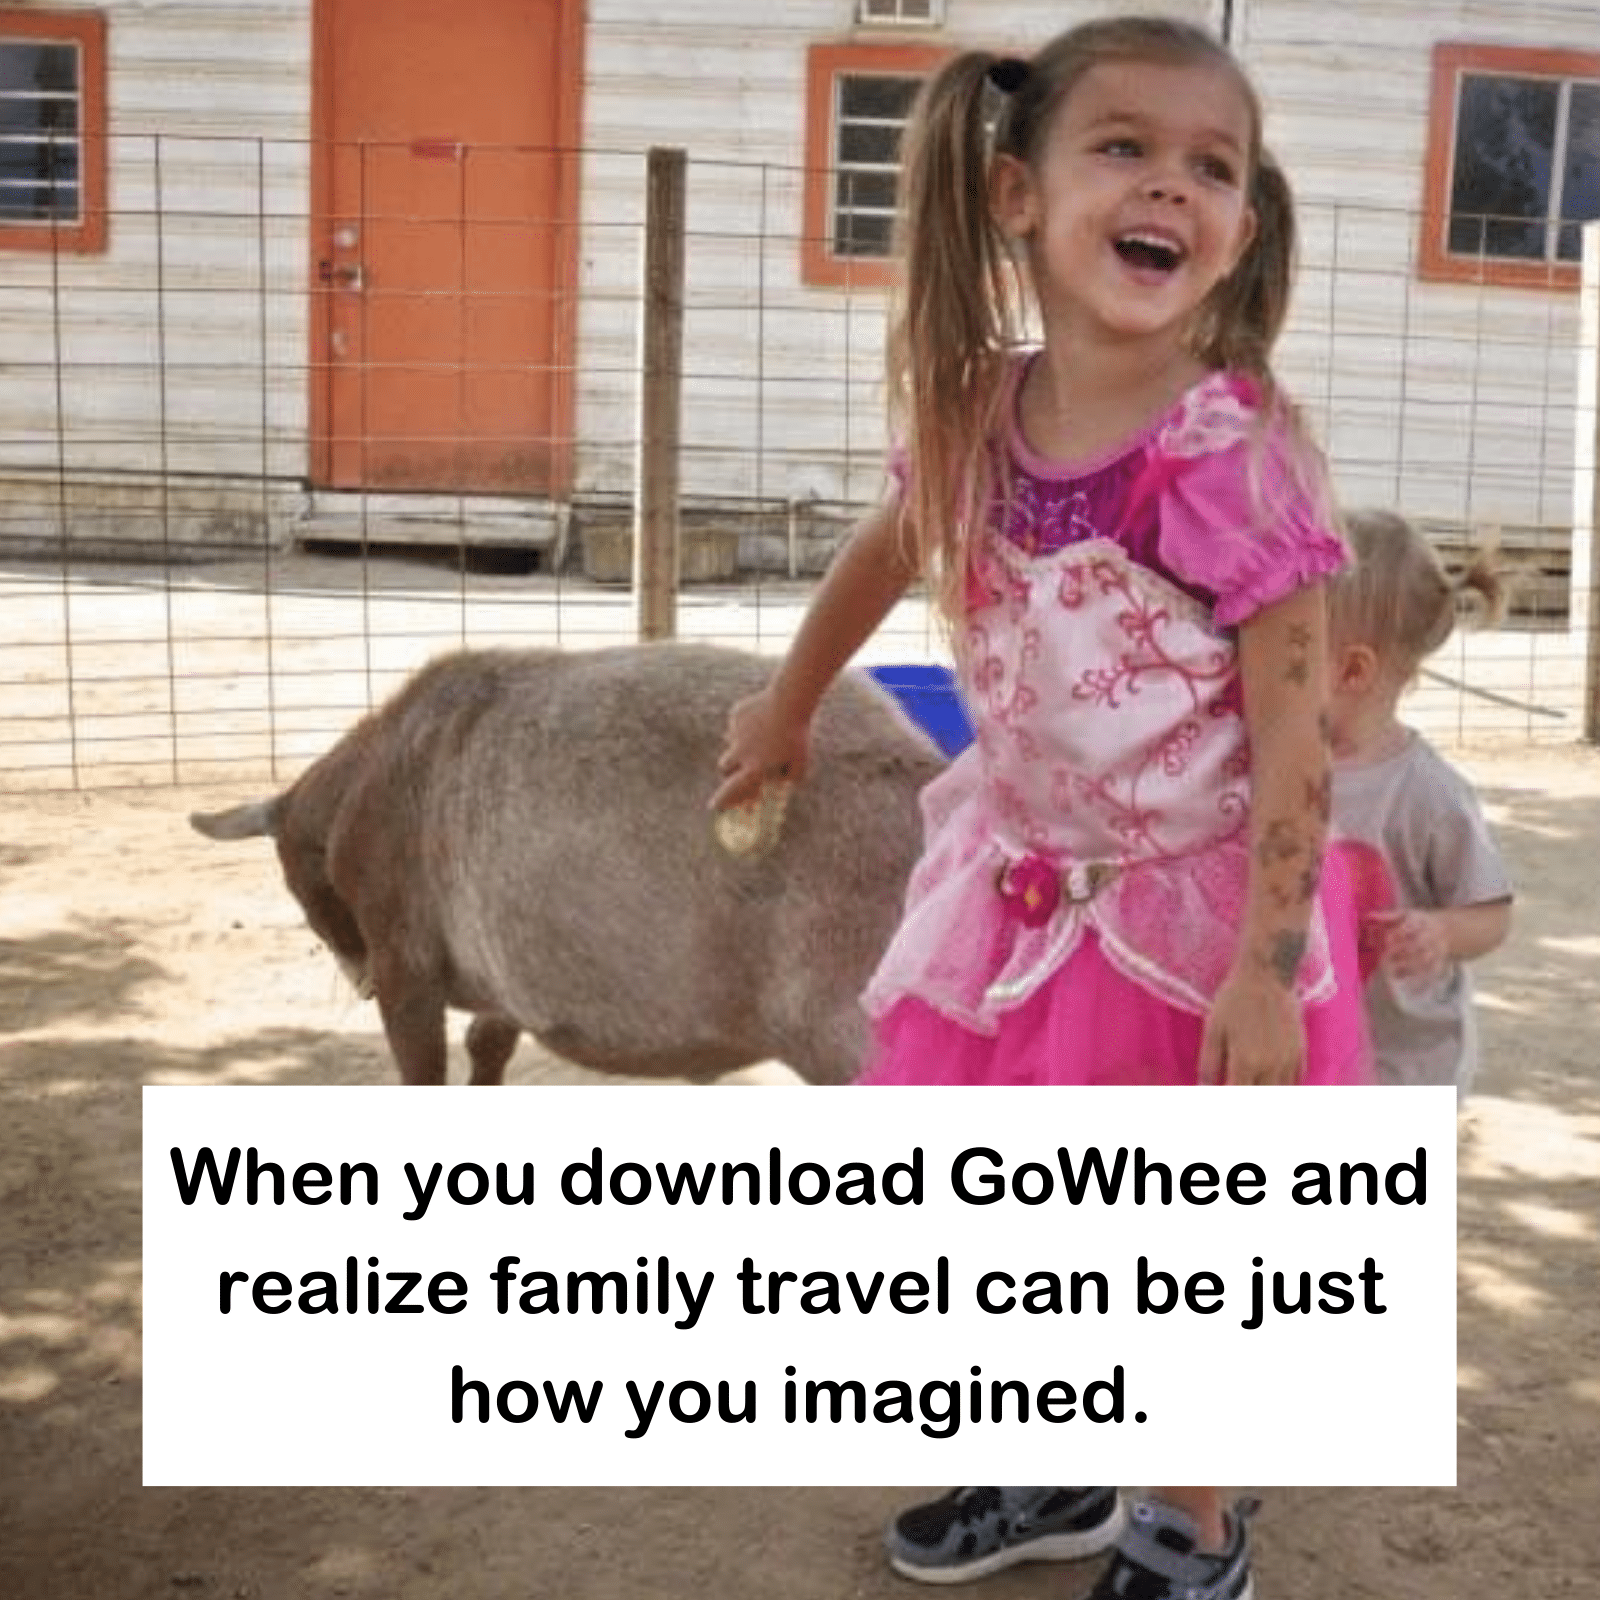 When you downloaded GoWhee and realize family travel can be just how you imagined